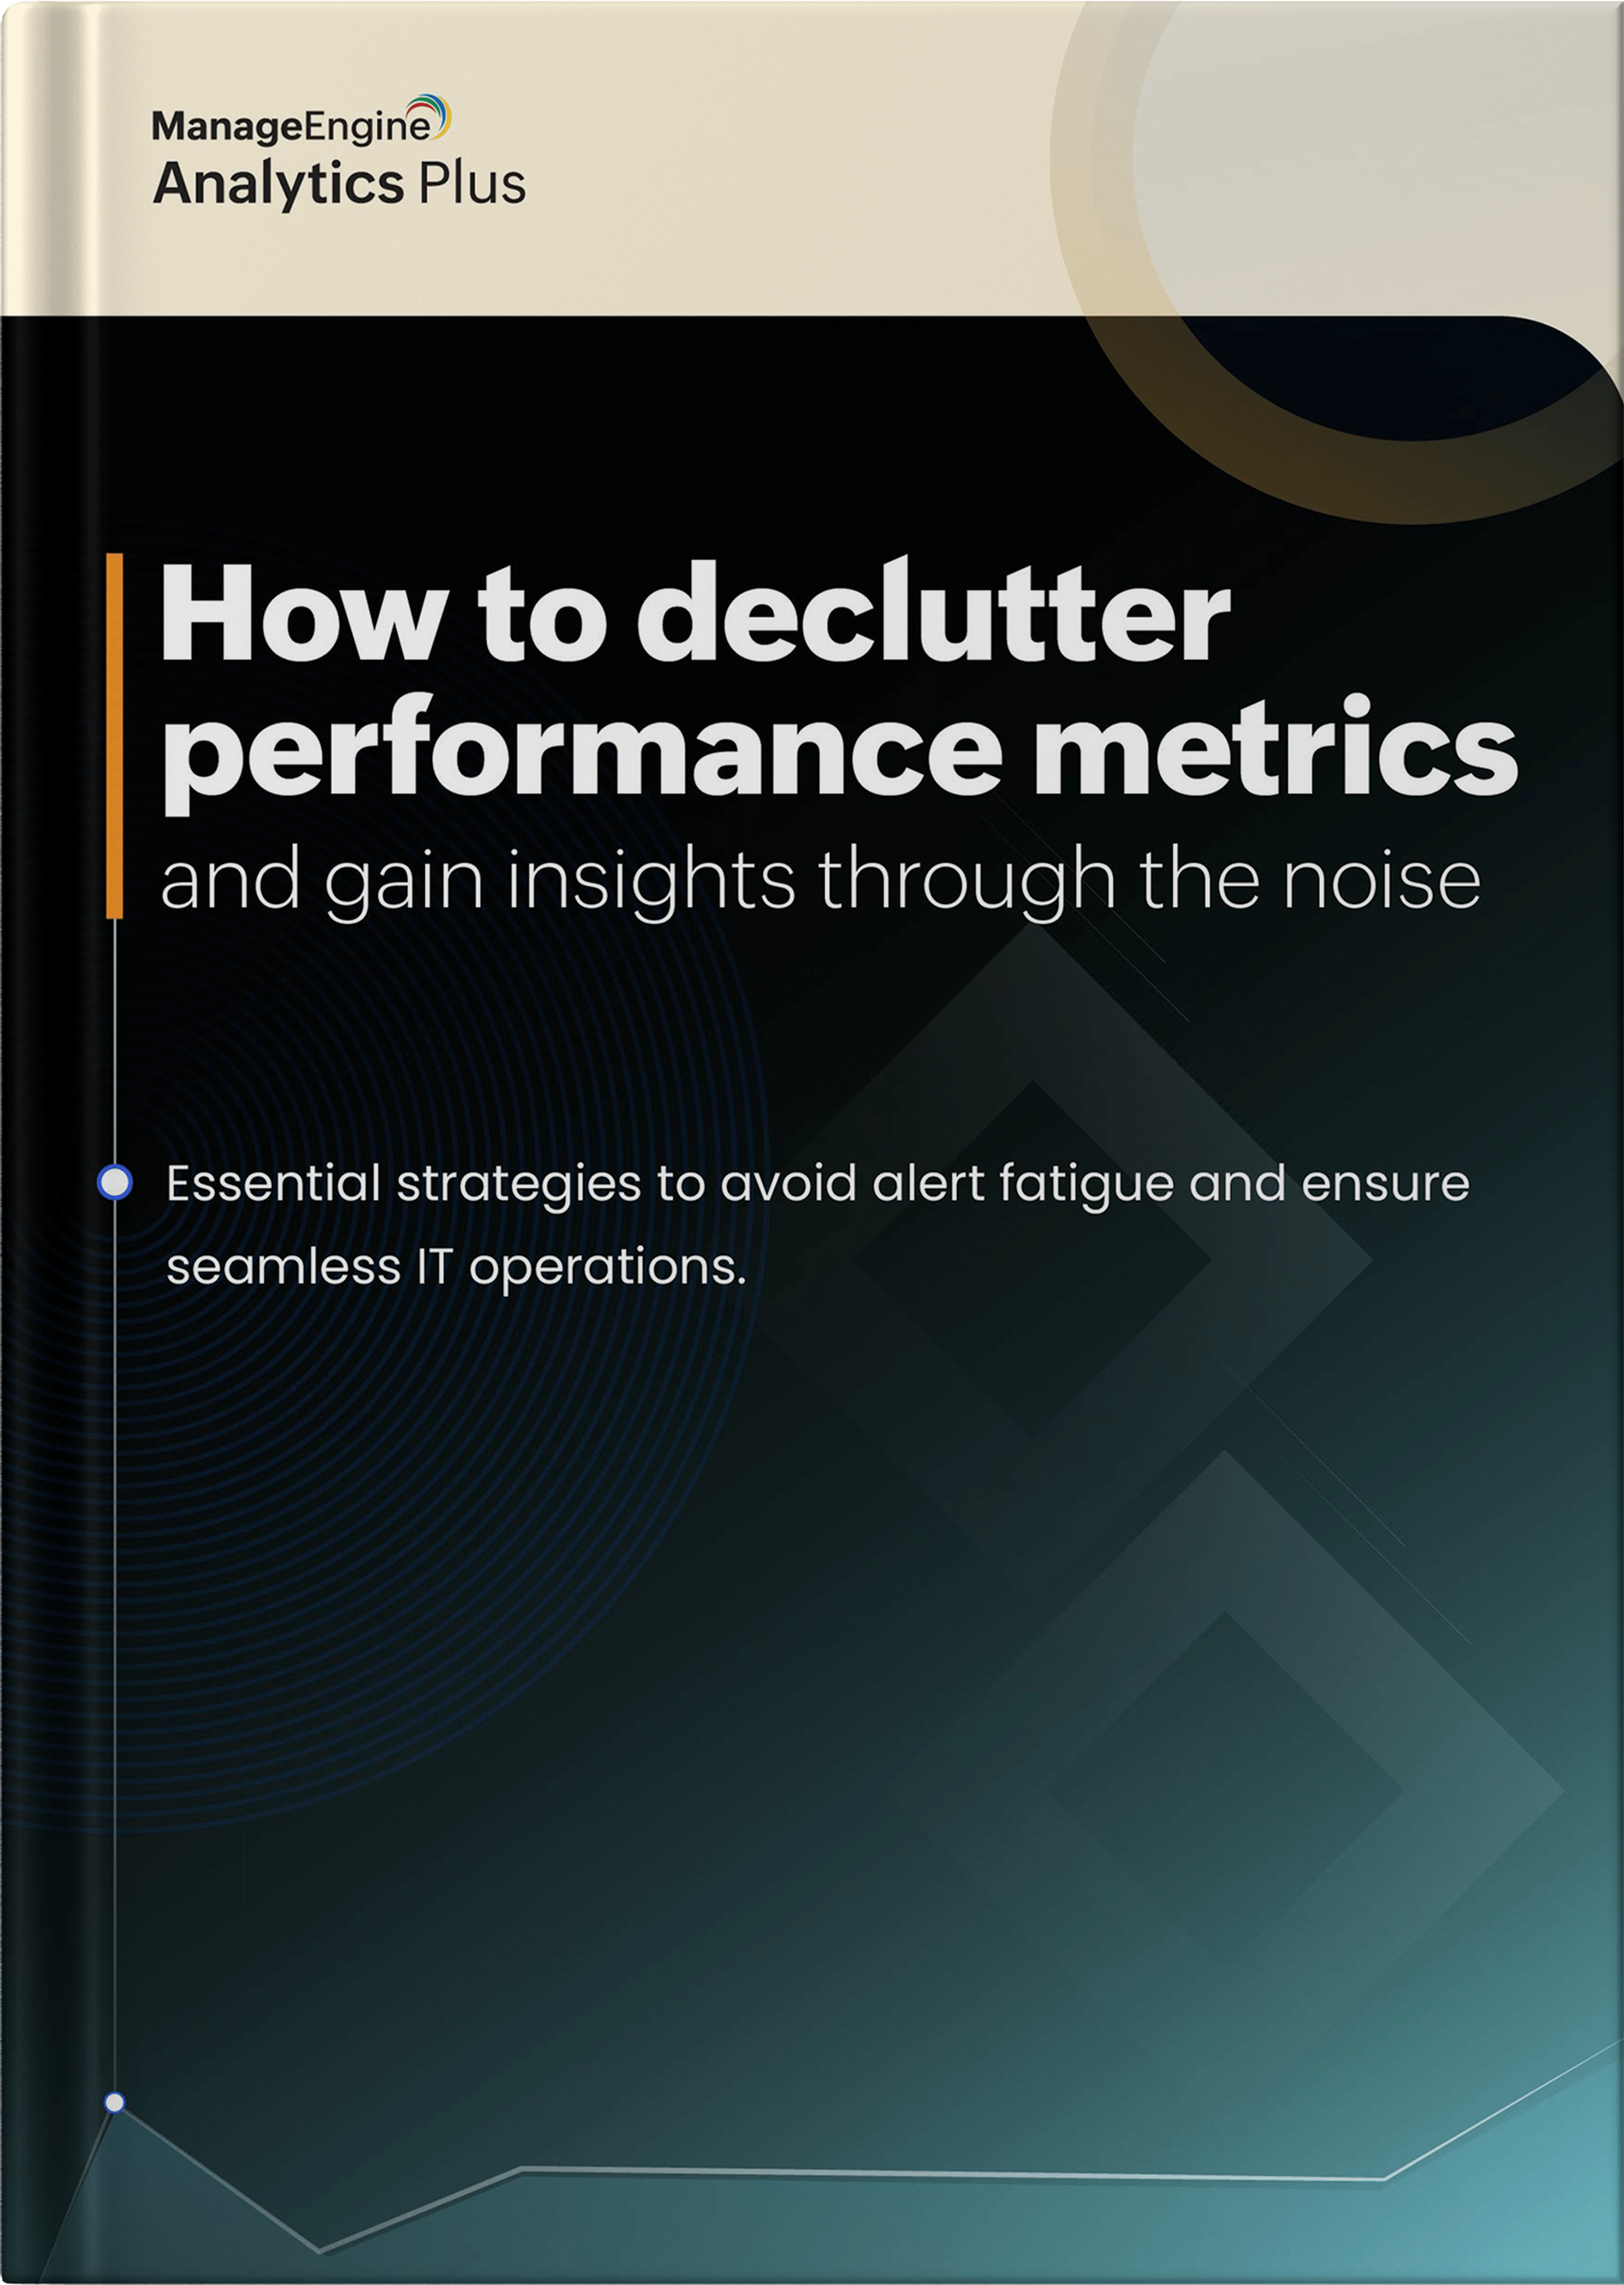  How to declutter performance metrics and gain insights through the noise